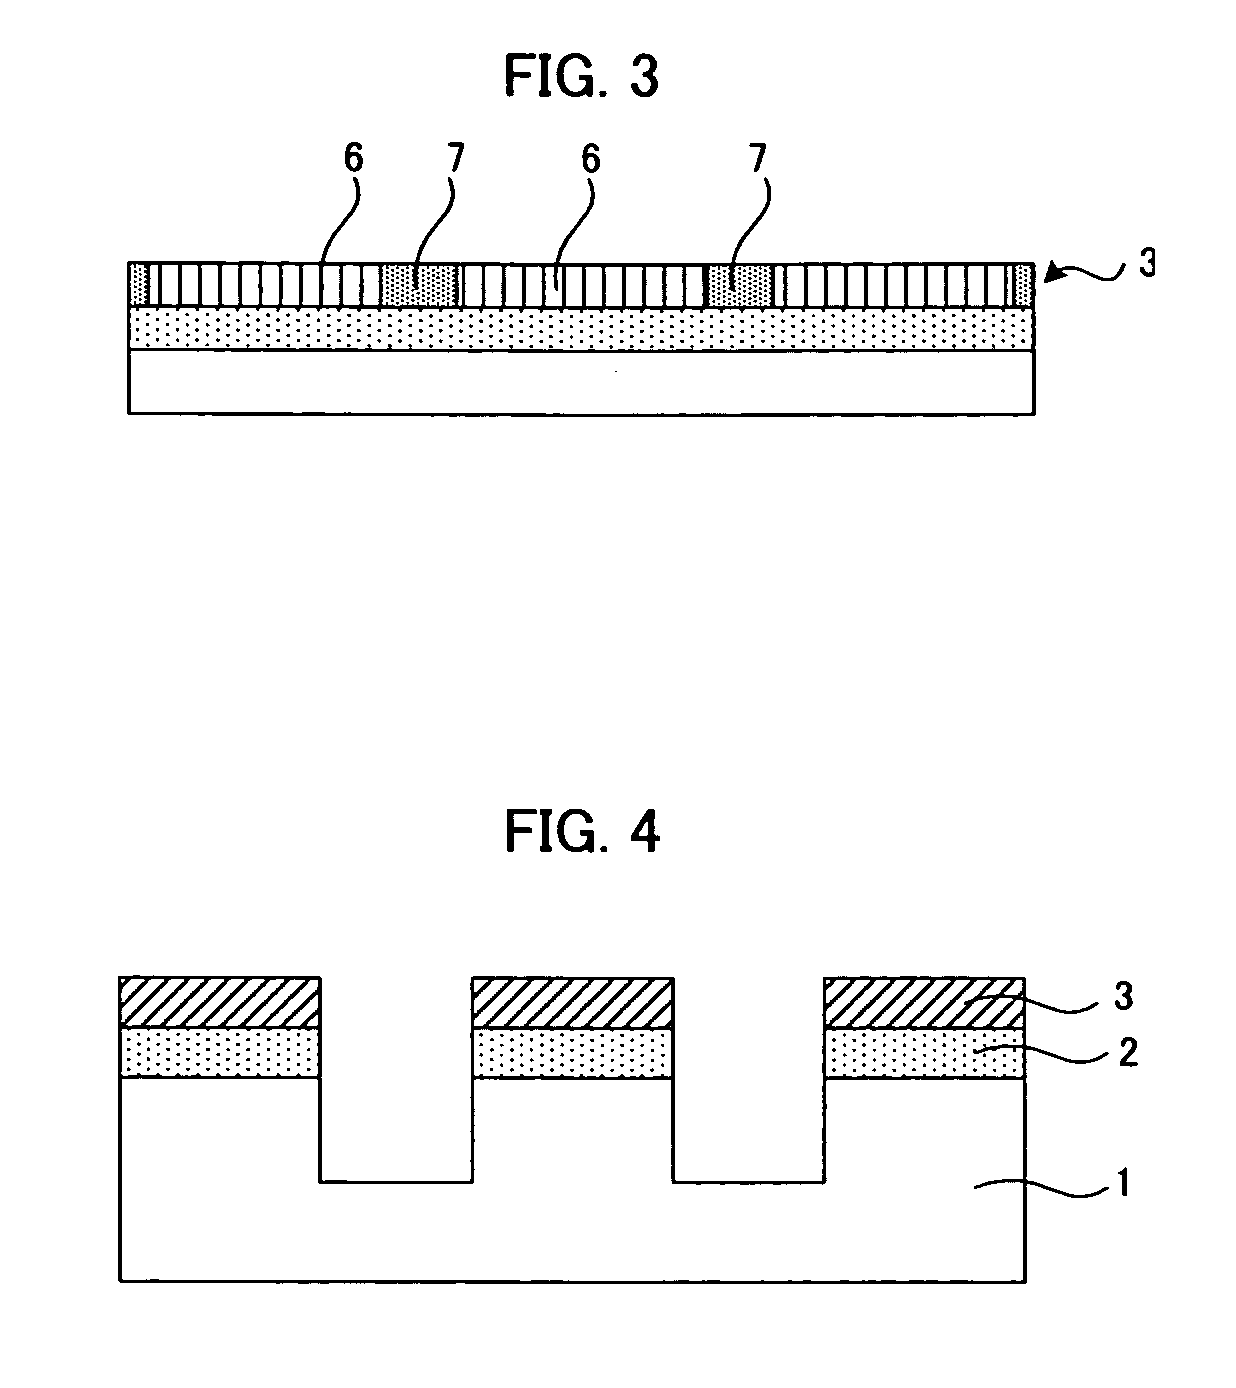 Substrate for cell transfer